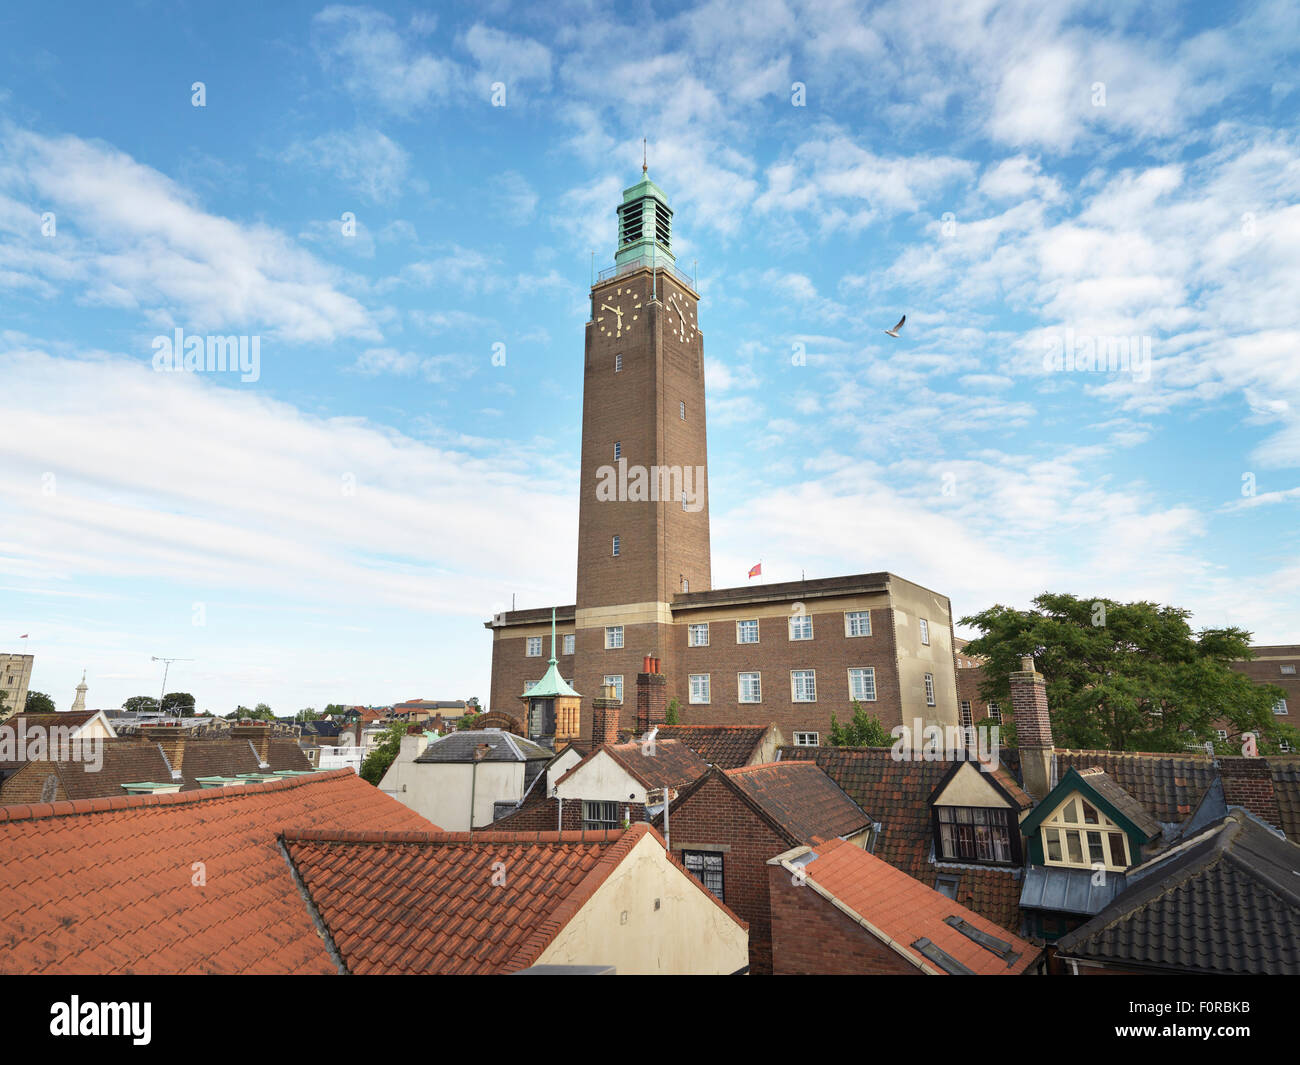 Shot of Norwich city hall clock tower that is a local landmark and well recognized in the eastern region of england. Copy space Stock Photo